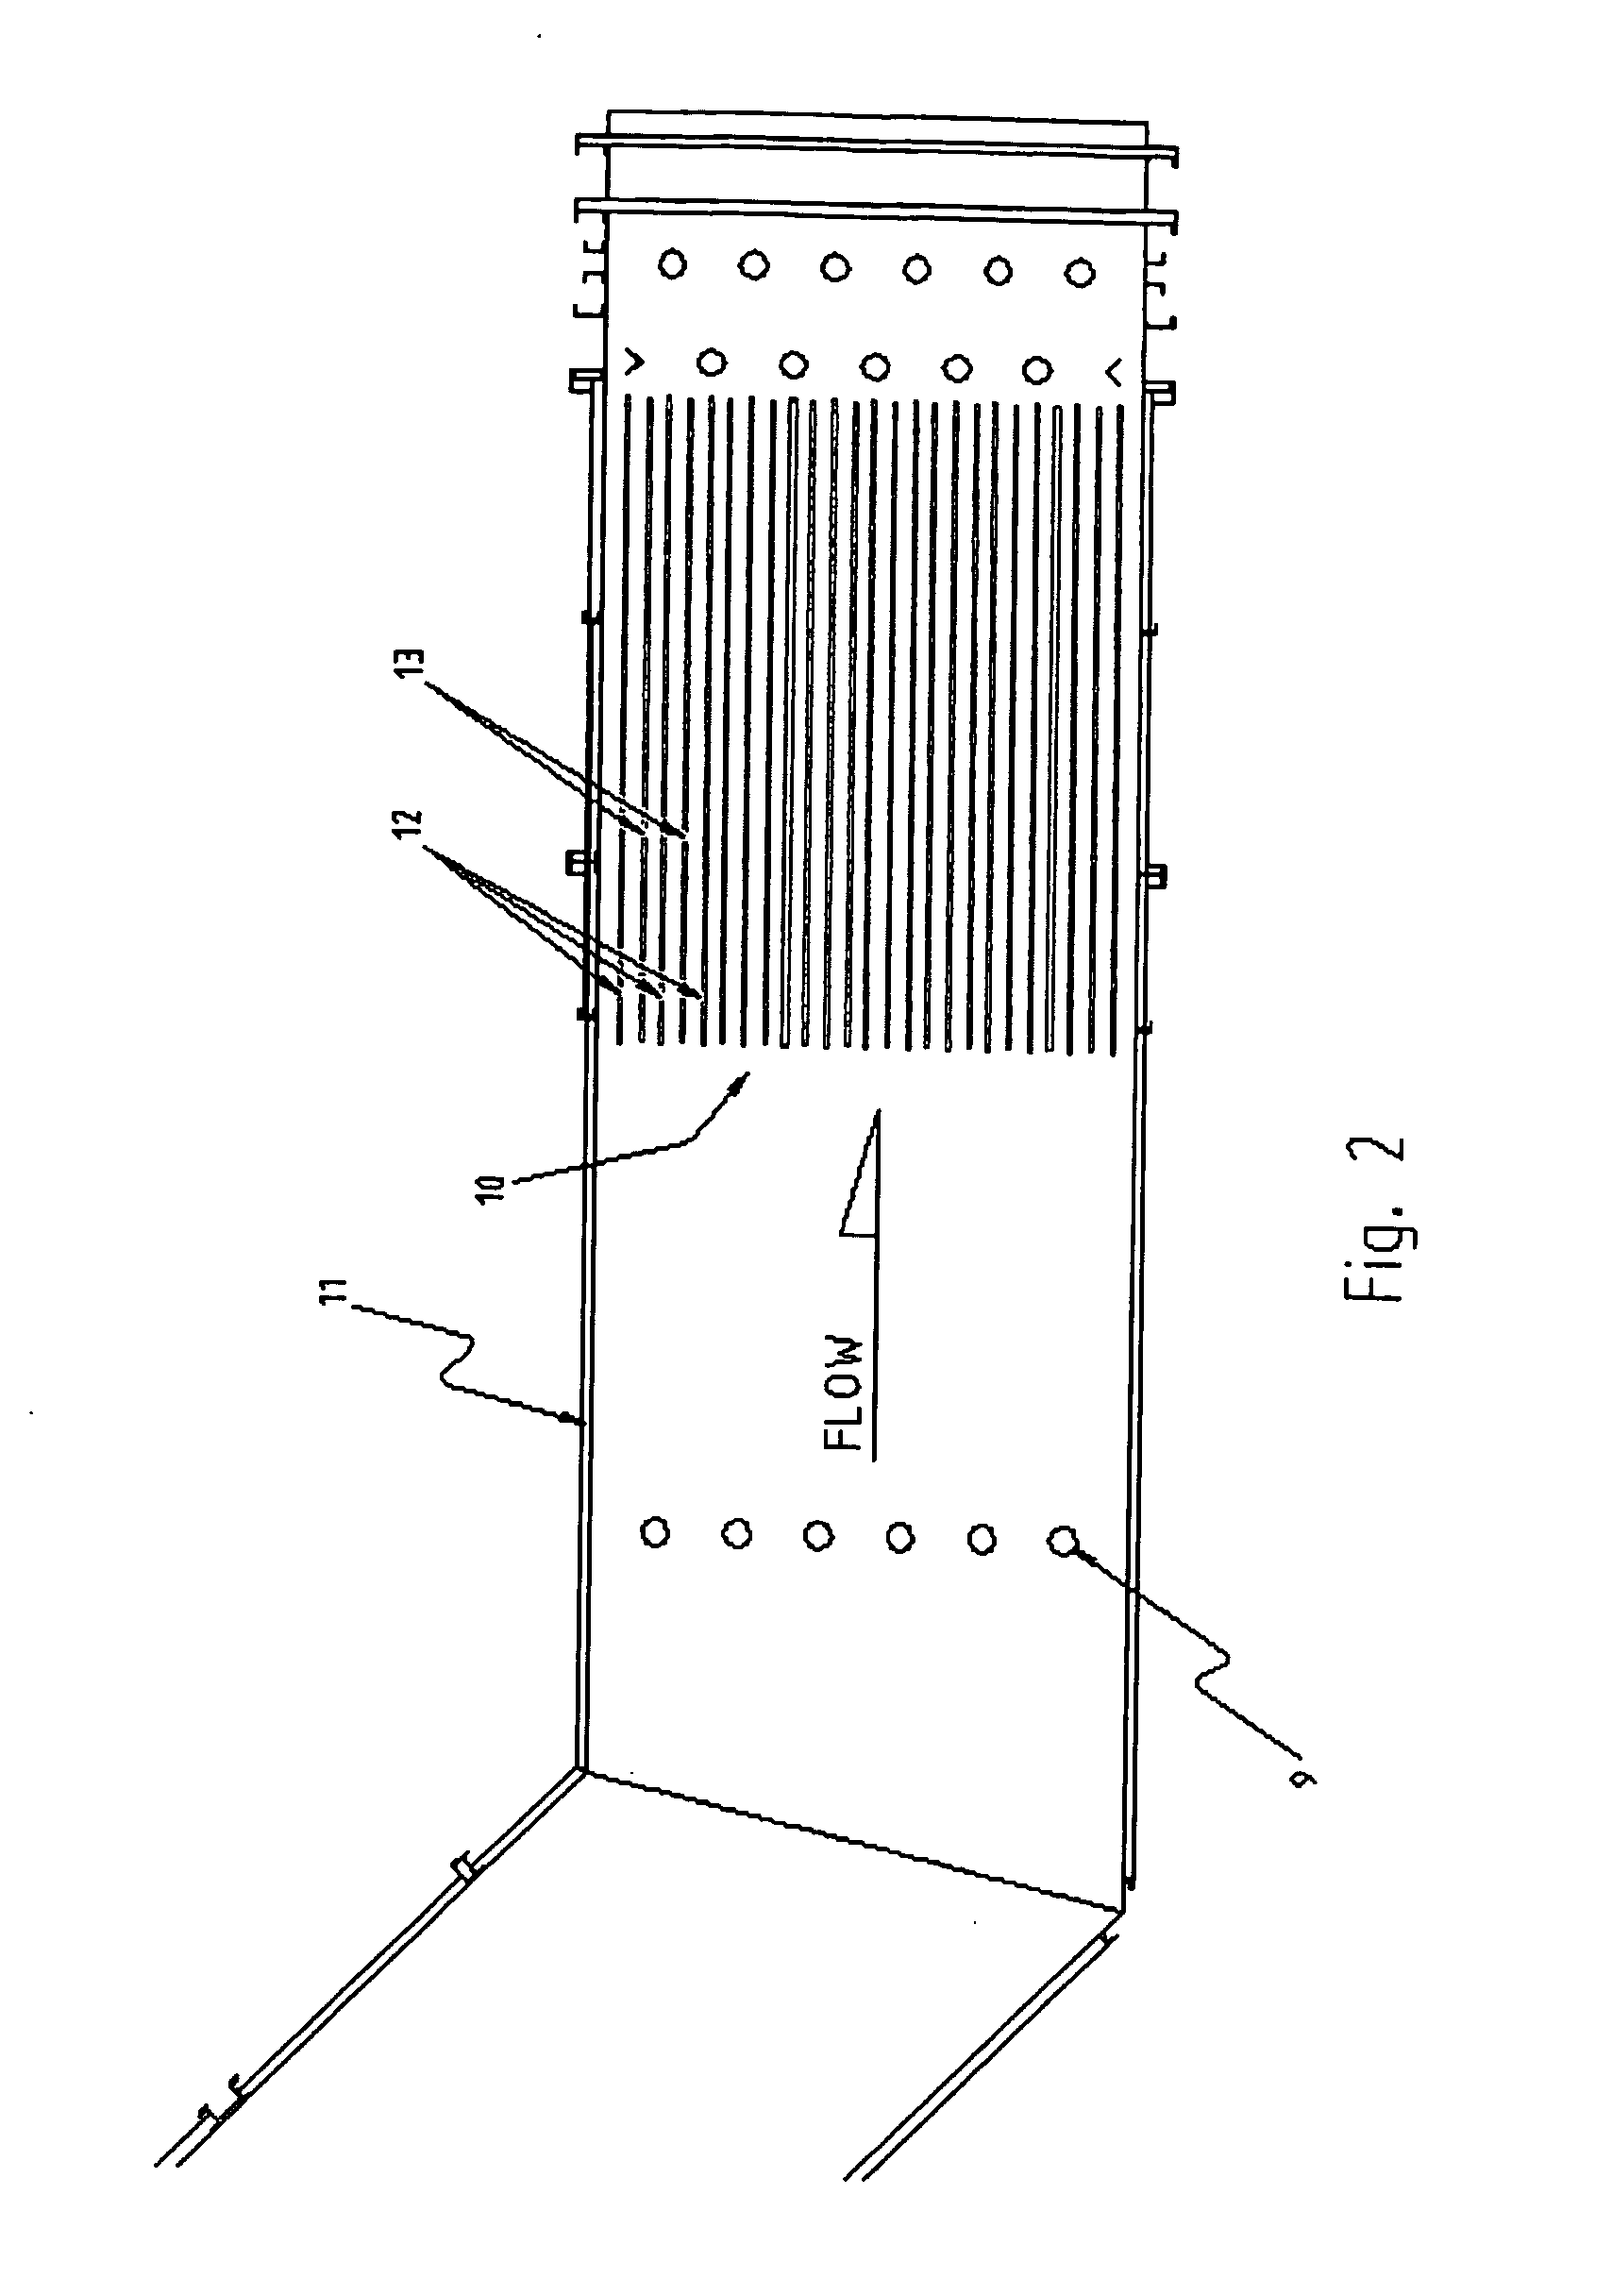 Method and apparatus for mixing fluids for particle agglomeration